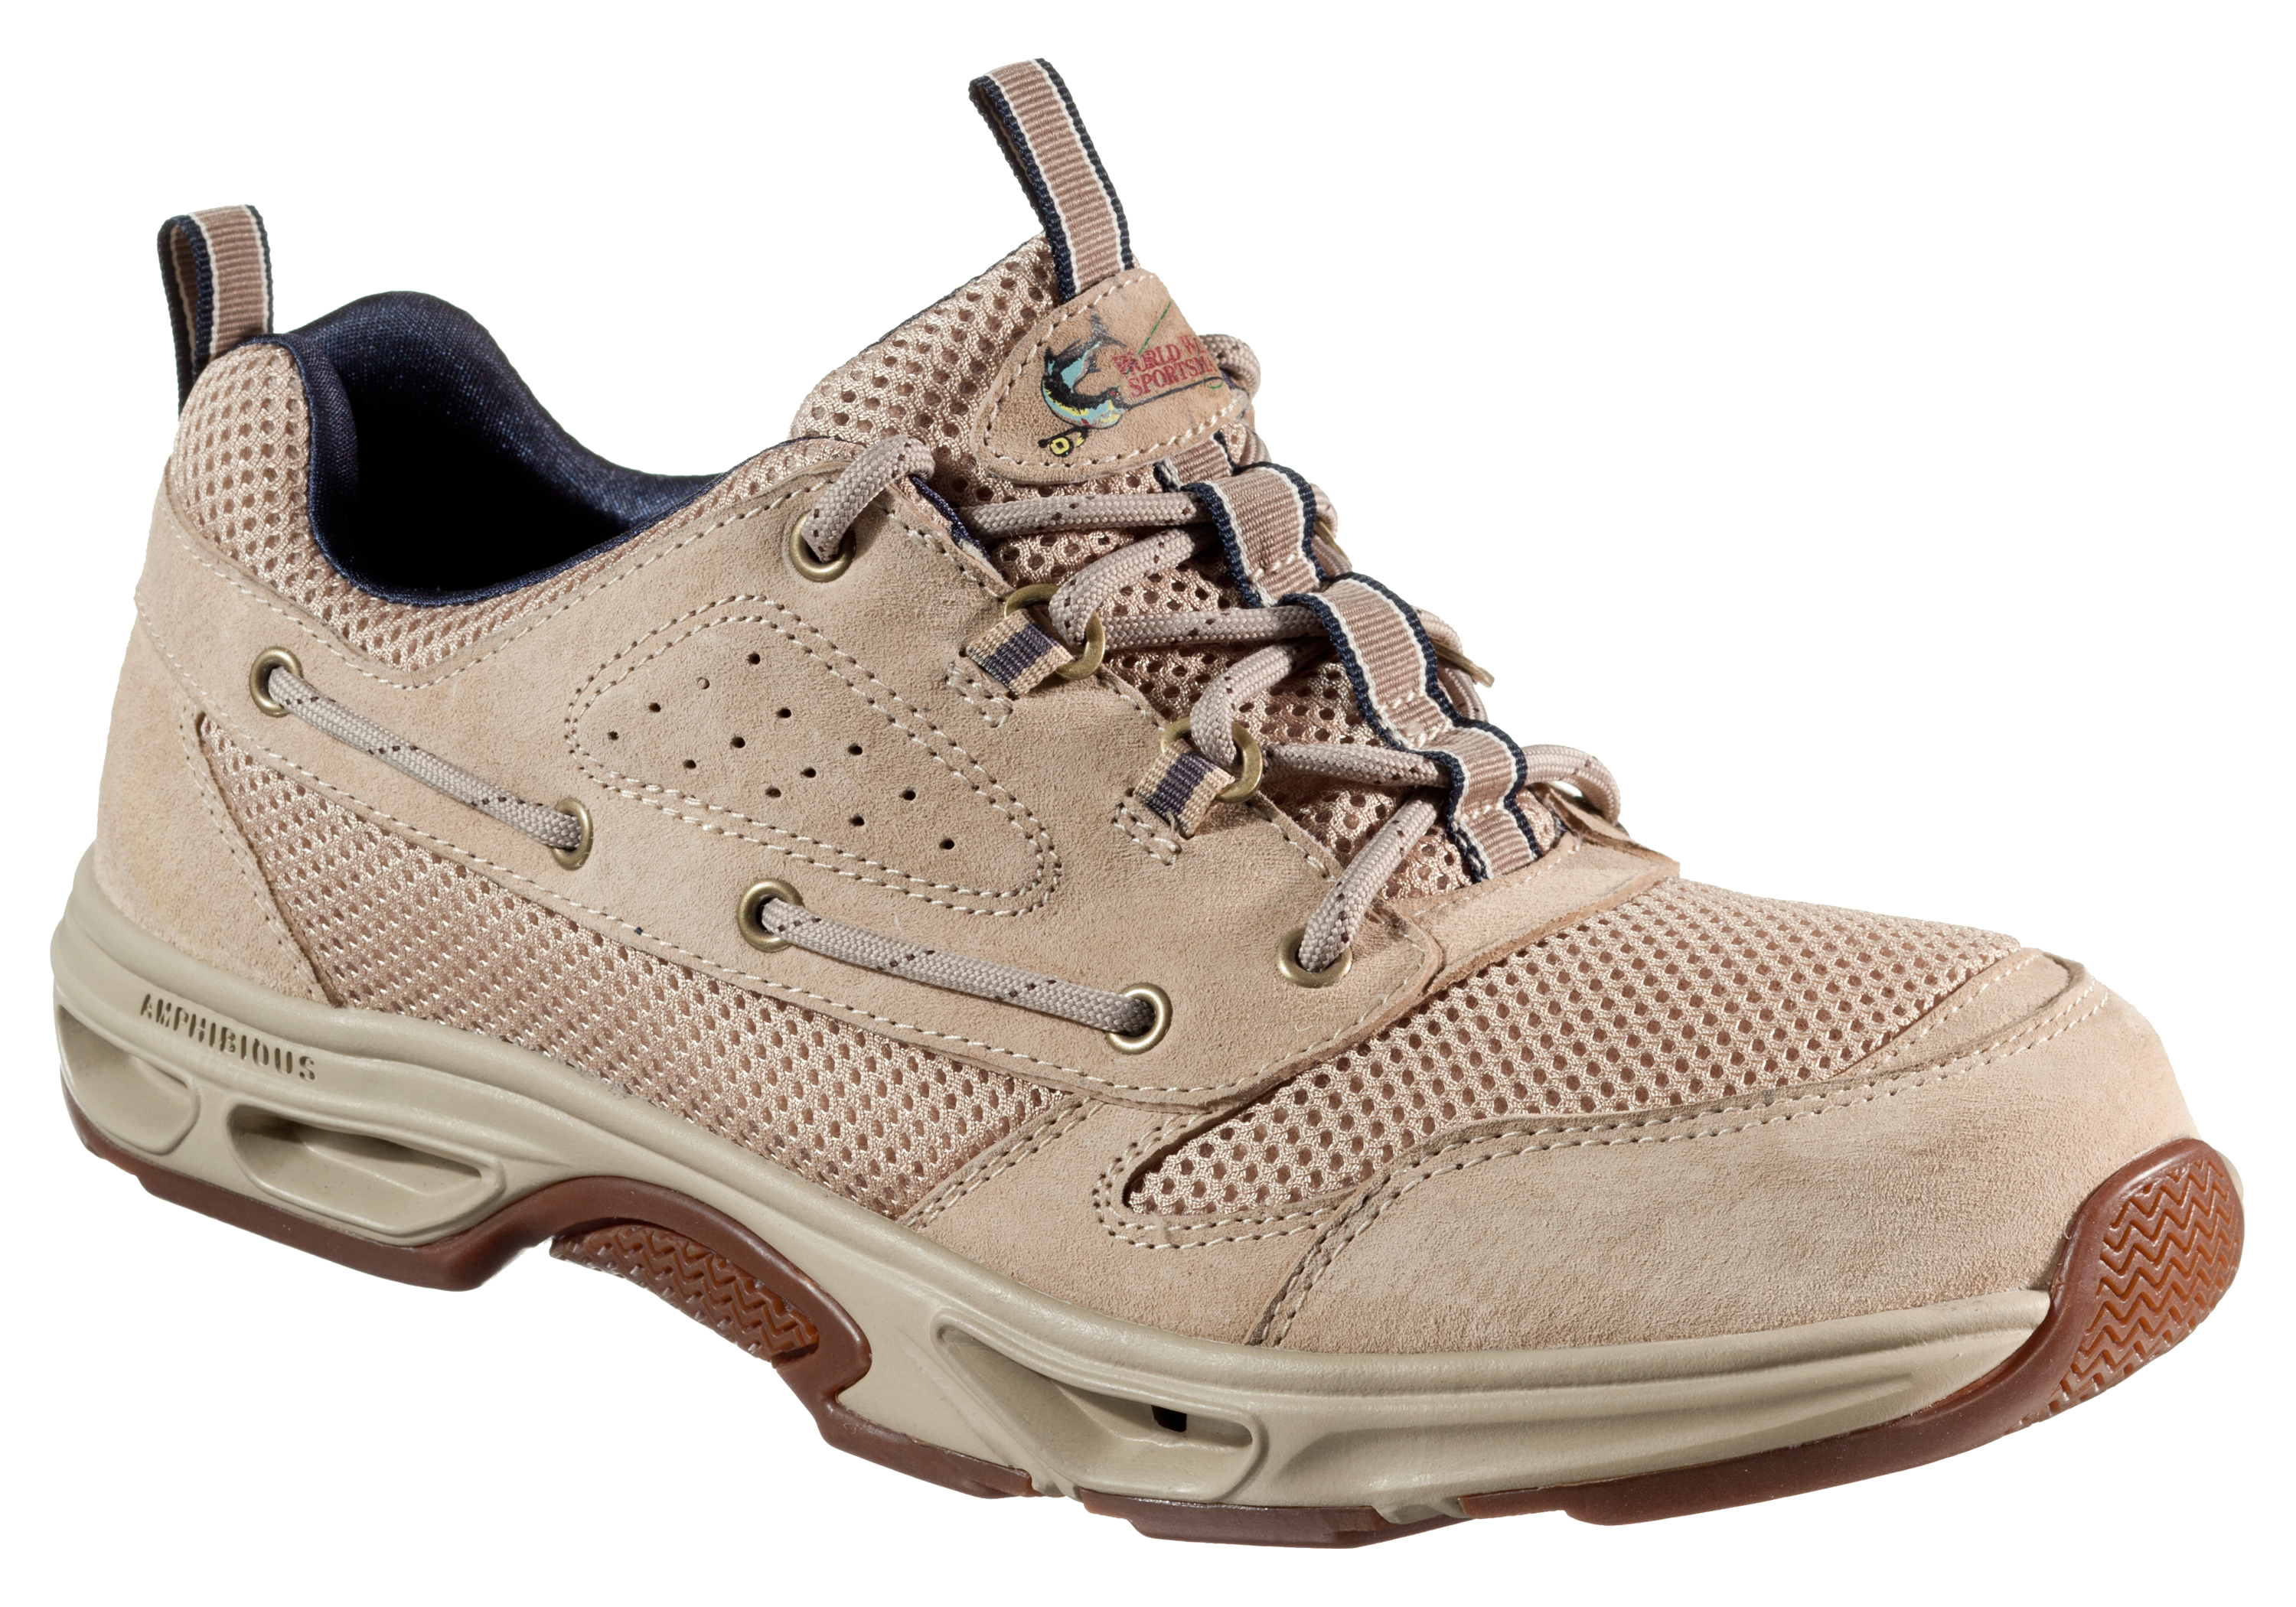 World Wide Sportsman Bayside Lace Fishing Shoes for Men - Tan